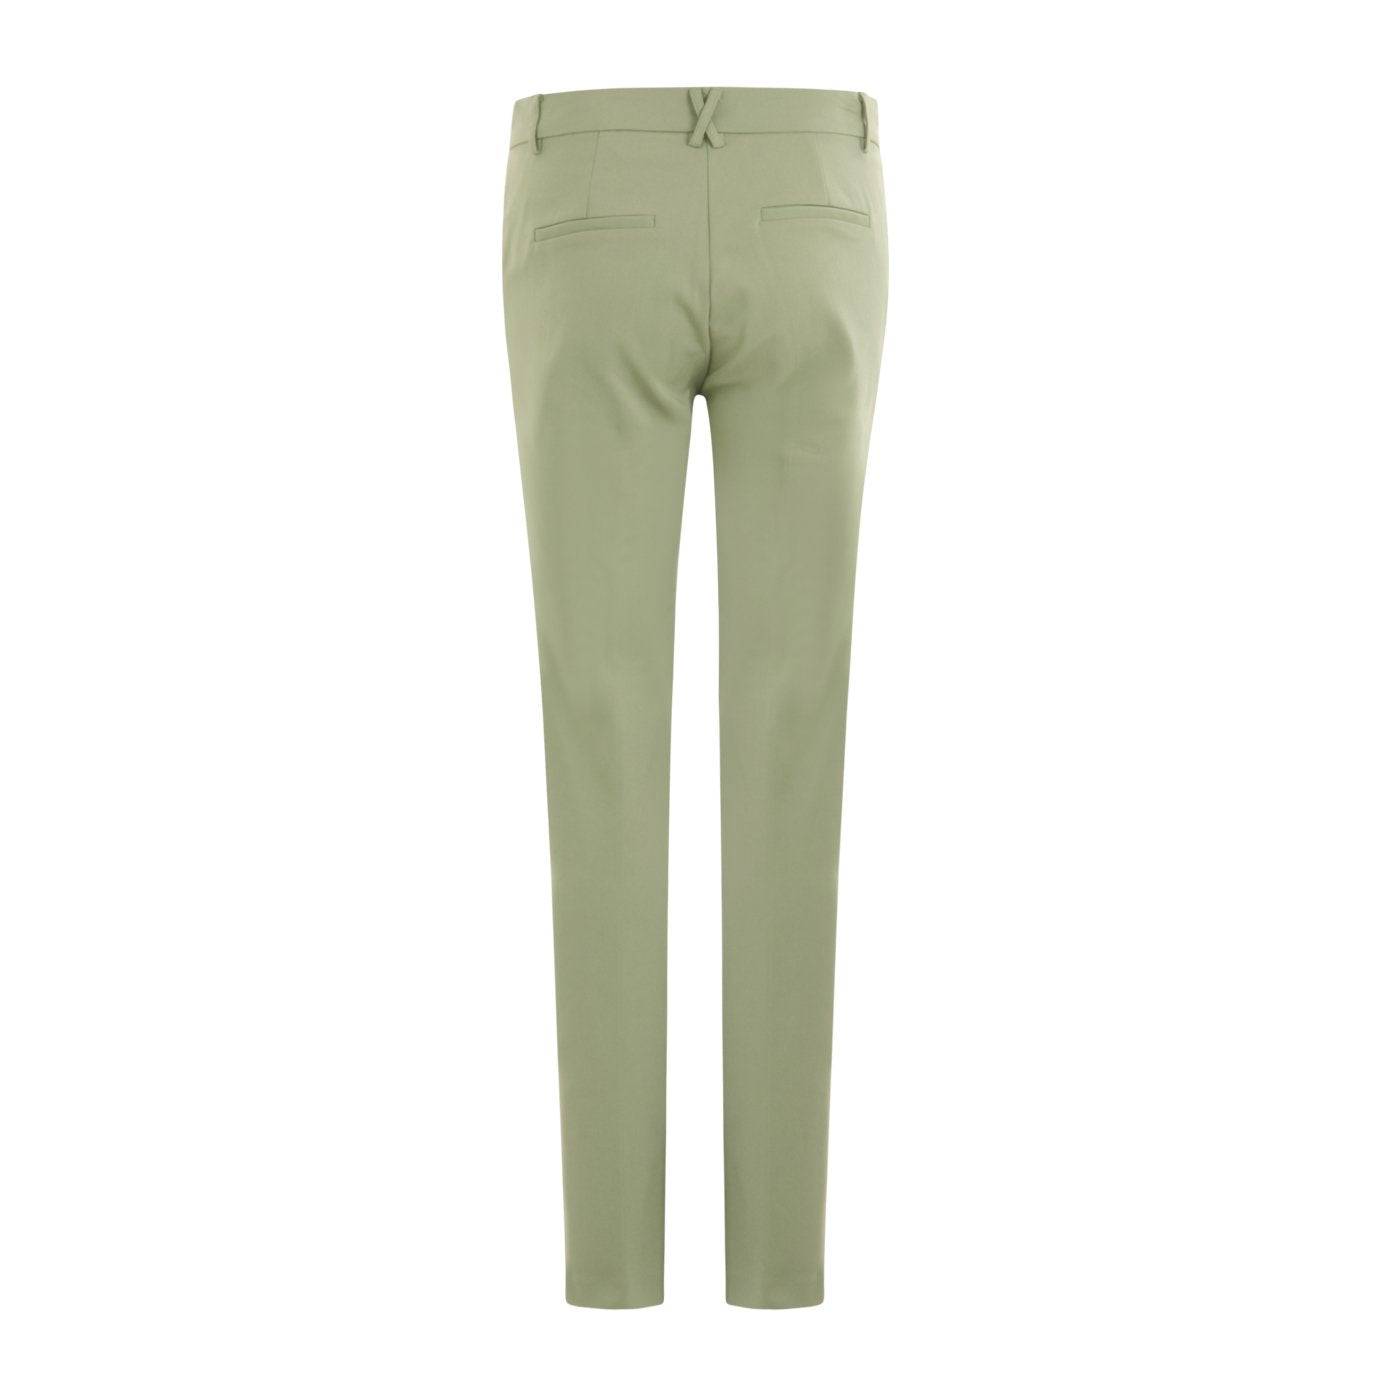 Coster Copenhagen tailored trousers in light green - Your Style Your Story